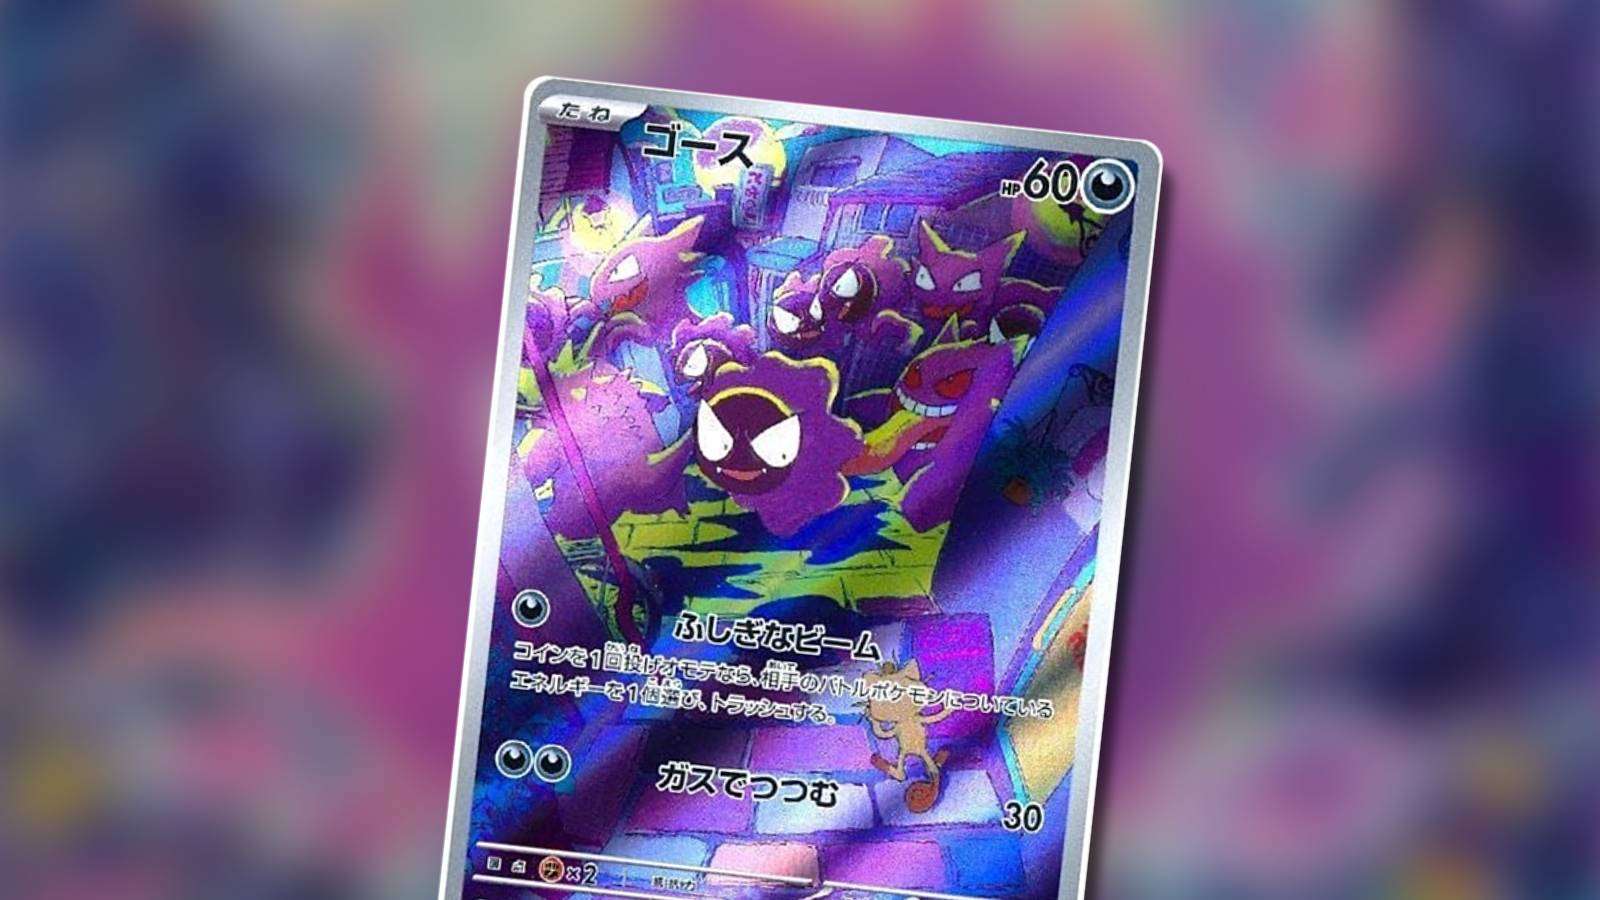 A Gastly Pokemon card appears against a blurred background